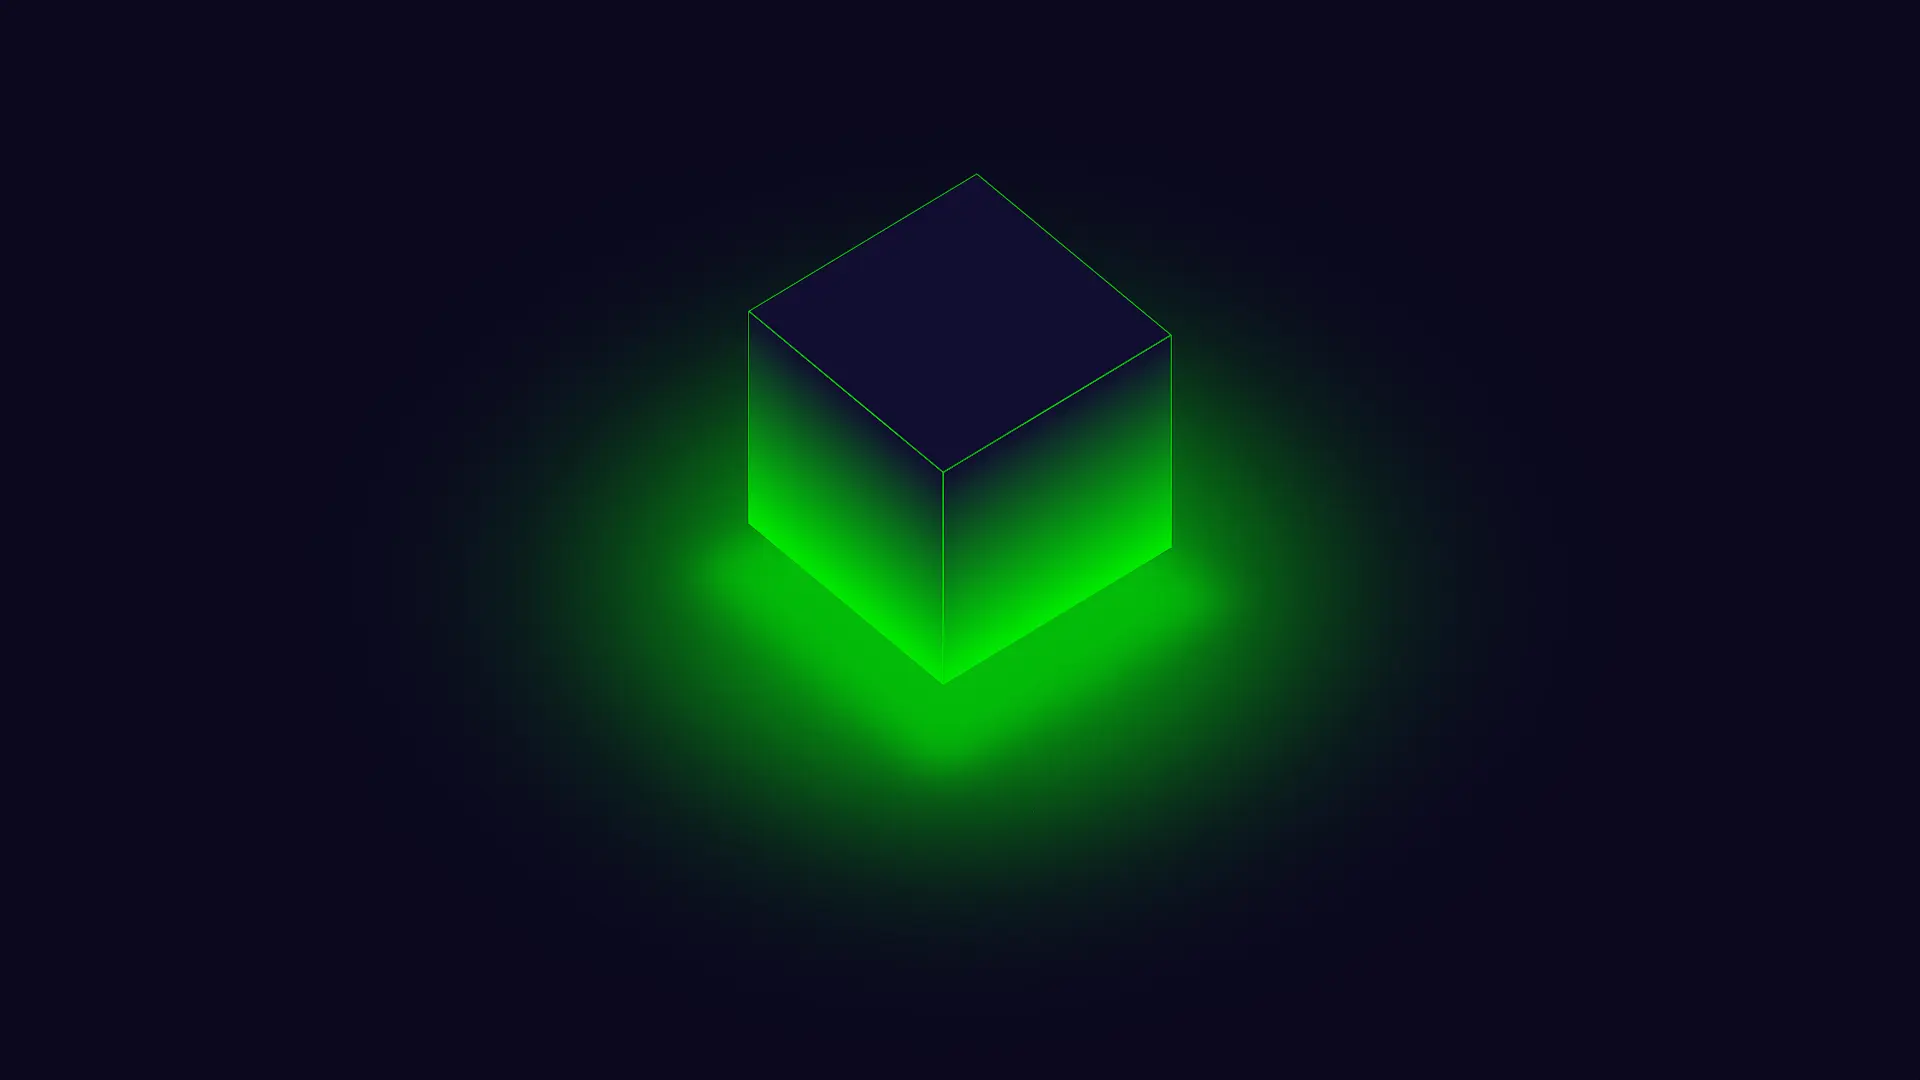 3D Glowing Bouncing Cube using CSS